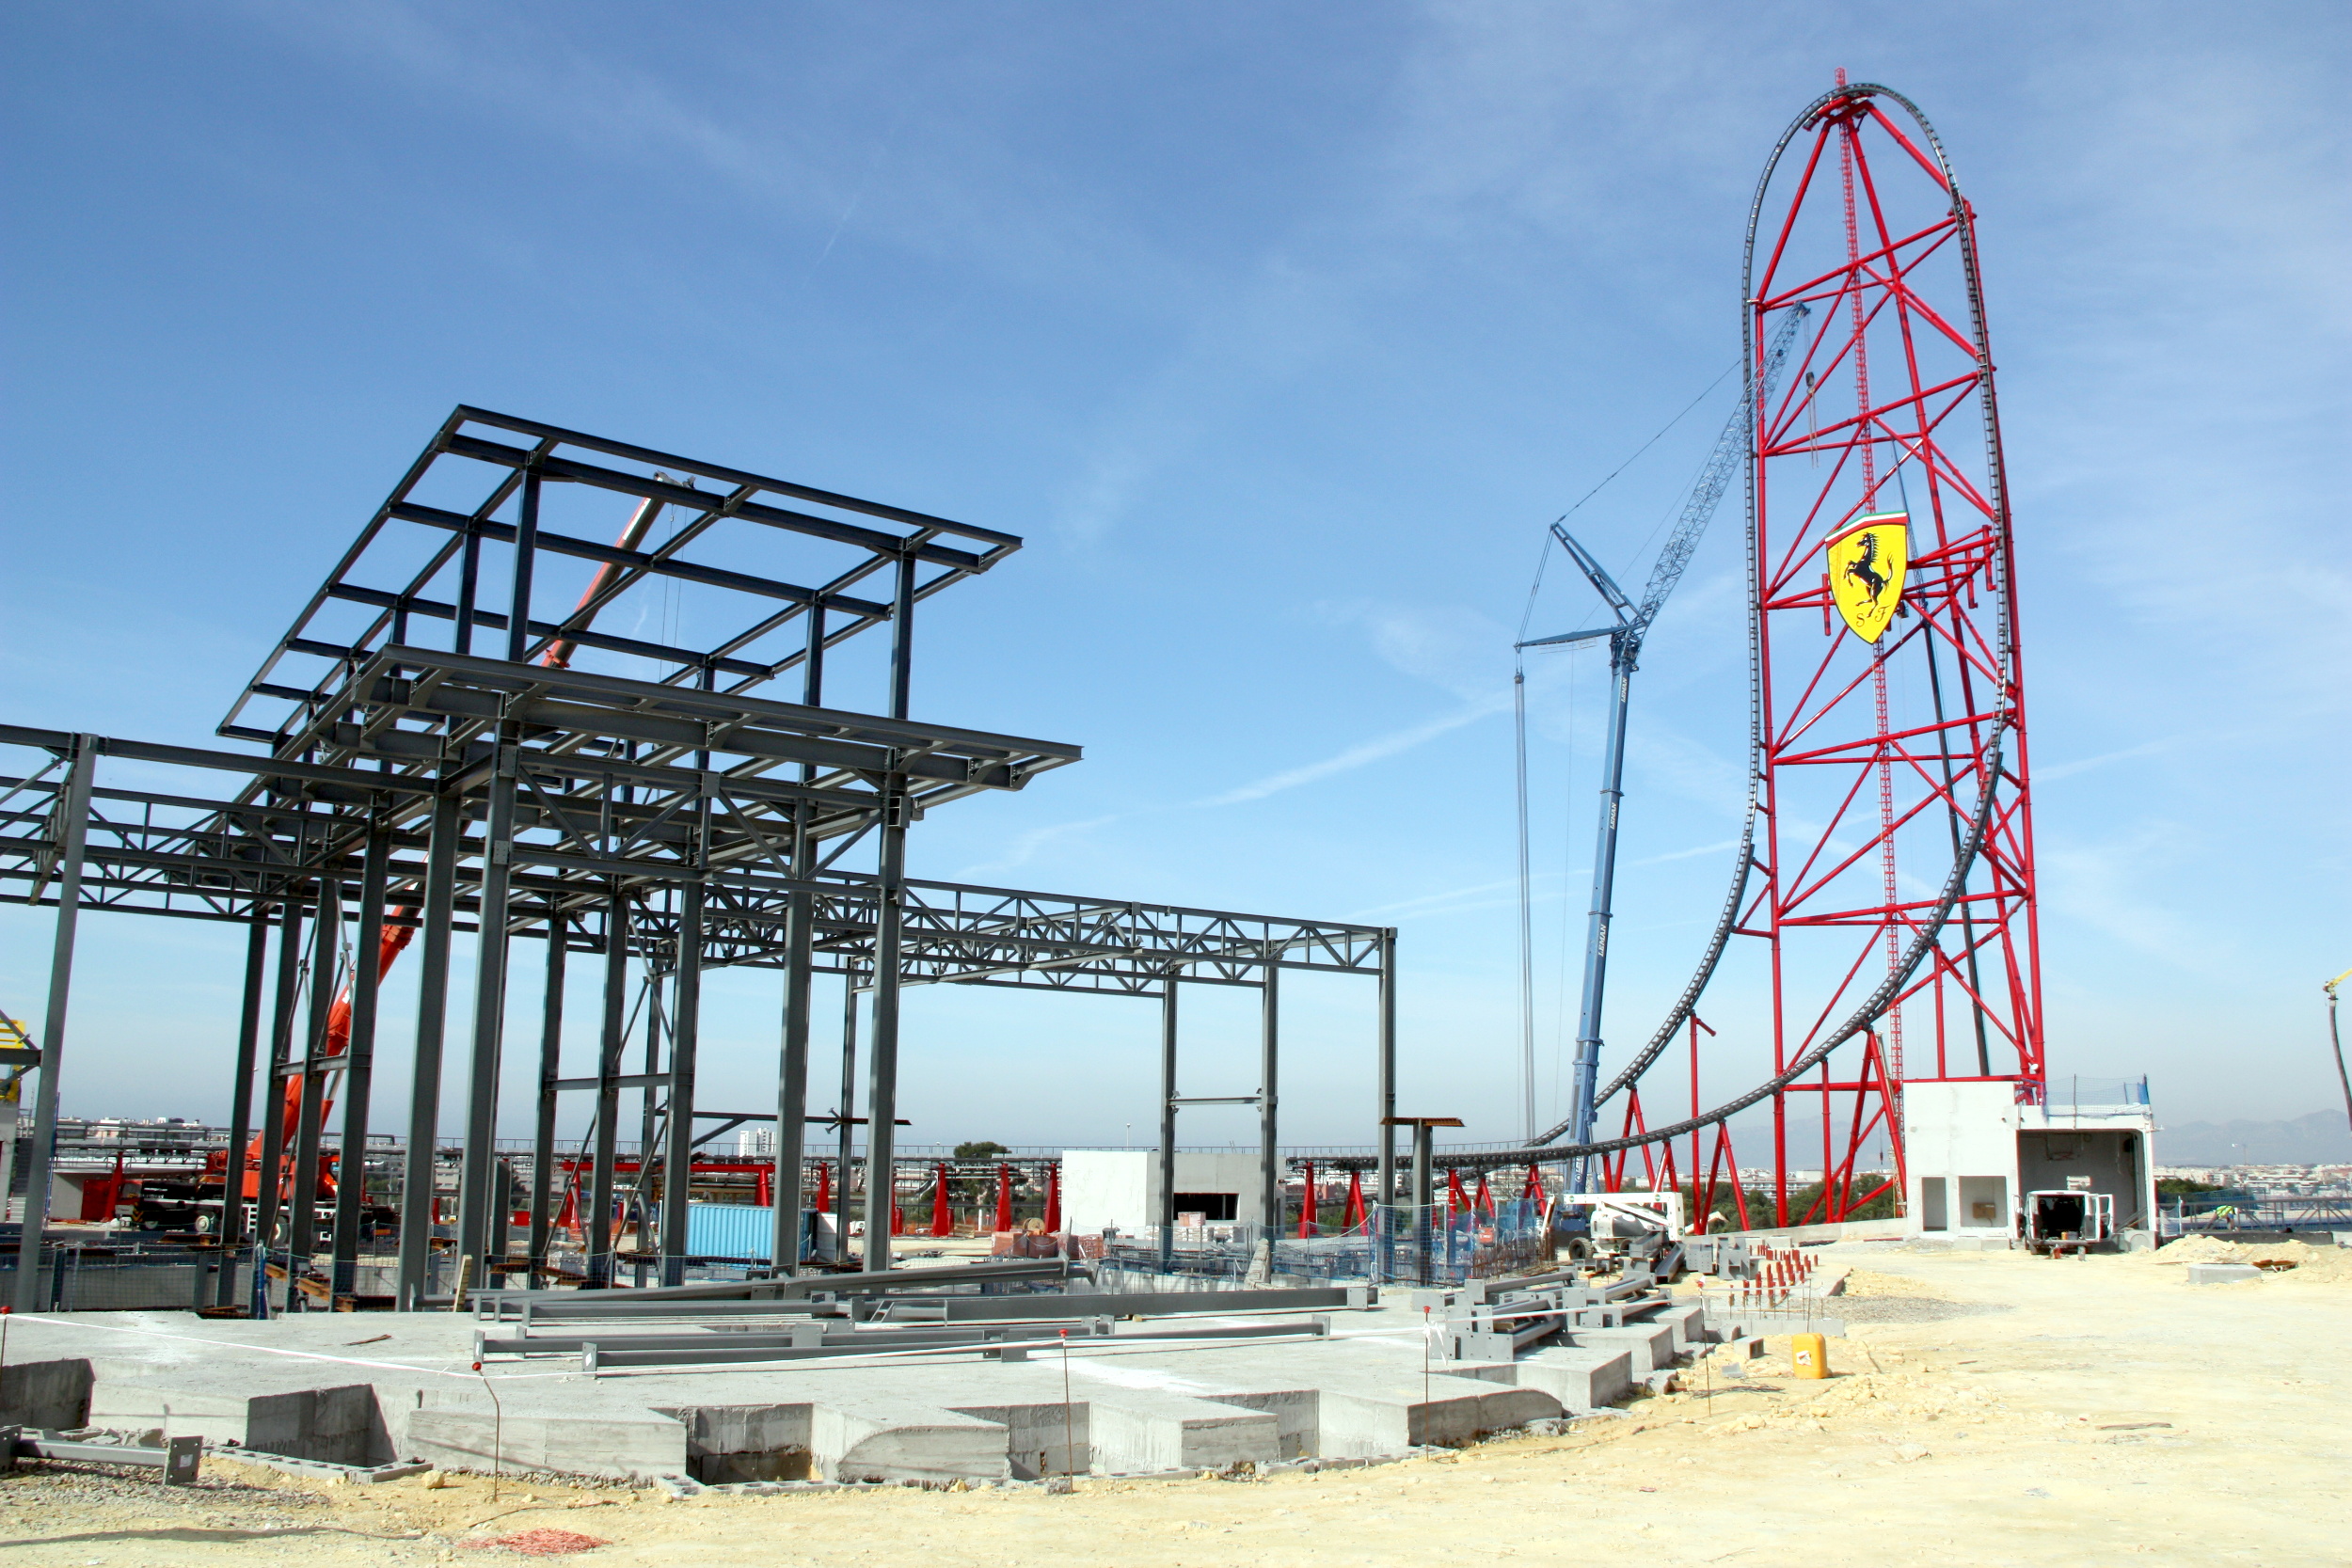 'Cavallino Rampante', Europe’s tallest rollercoaster, will be one of Ferrari Land's main attractions (by ACN)